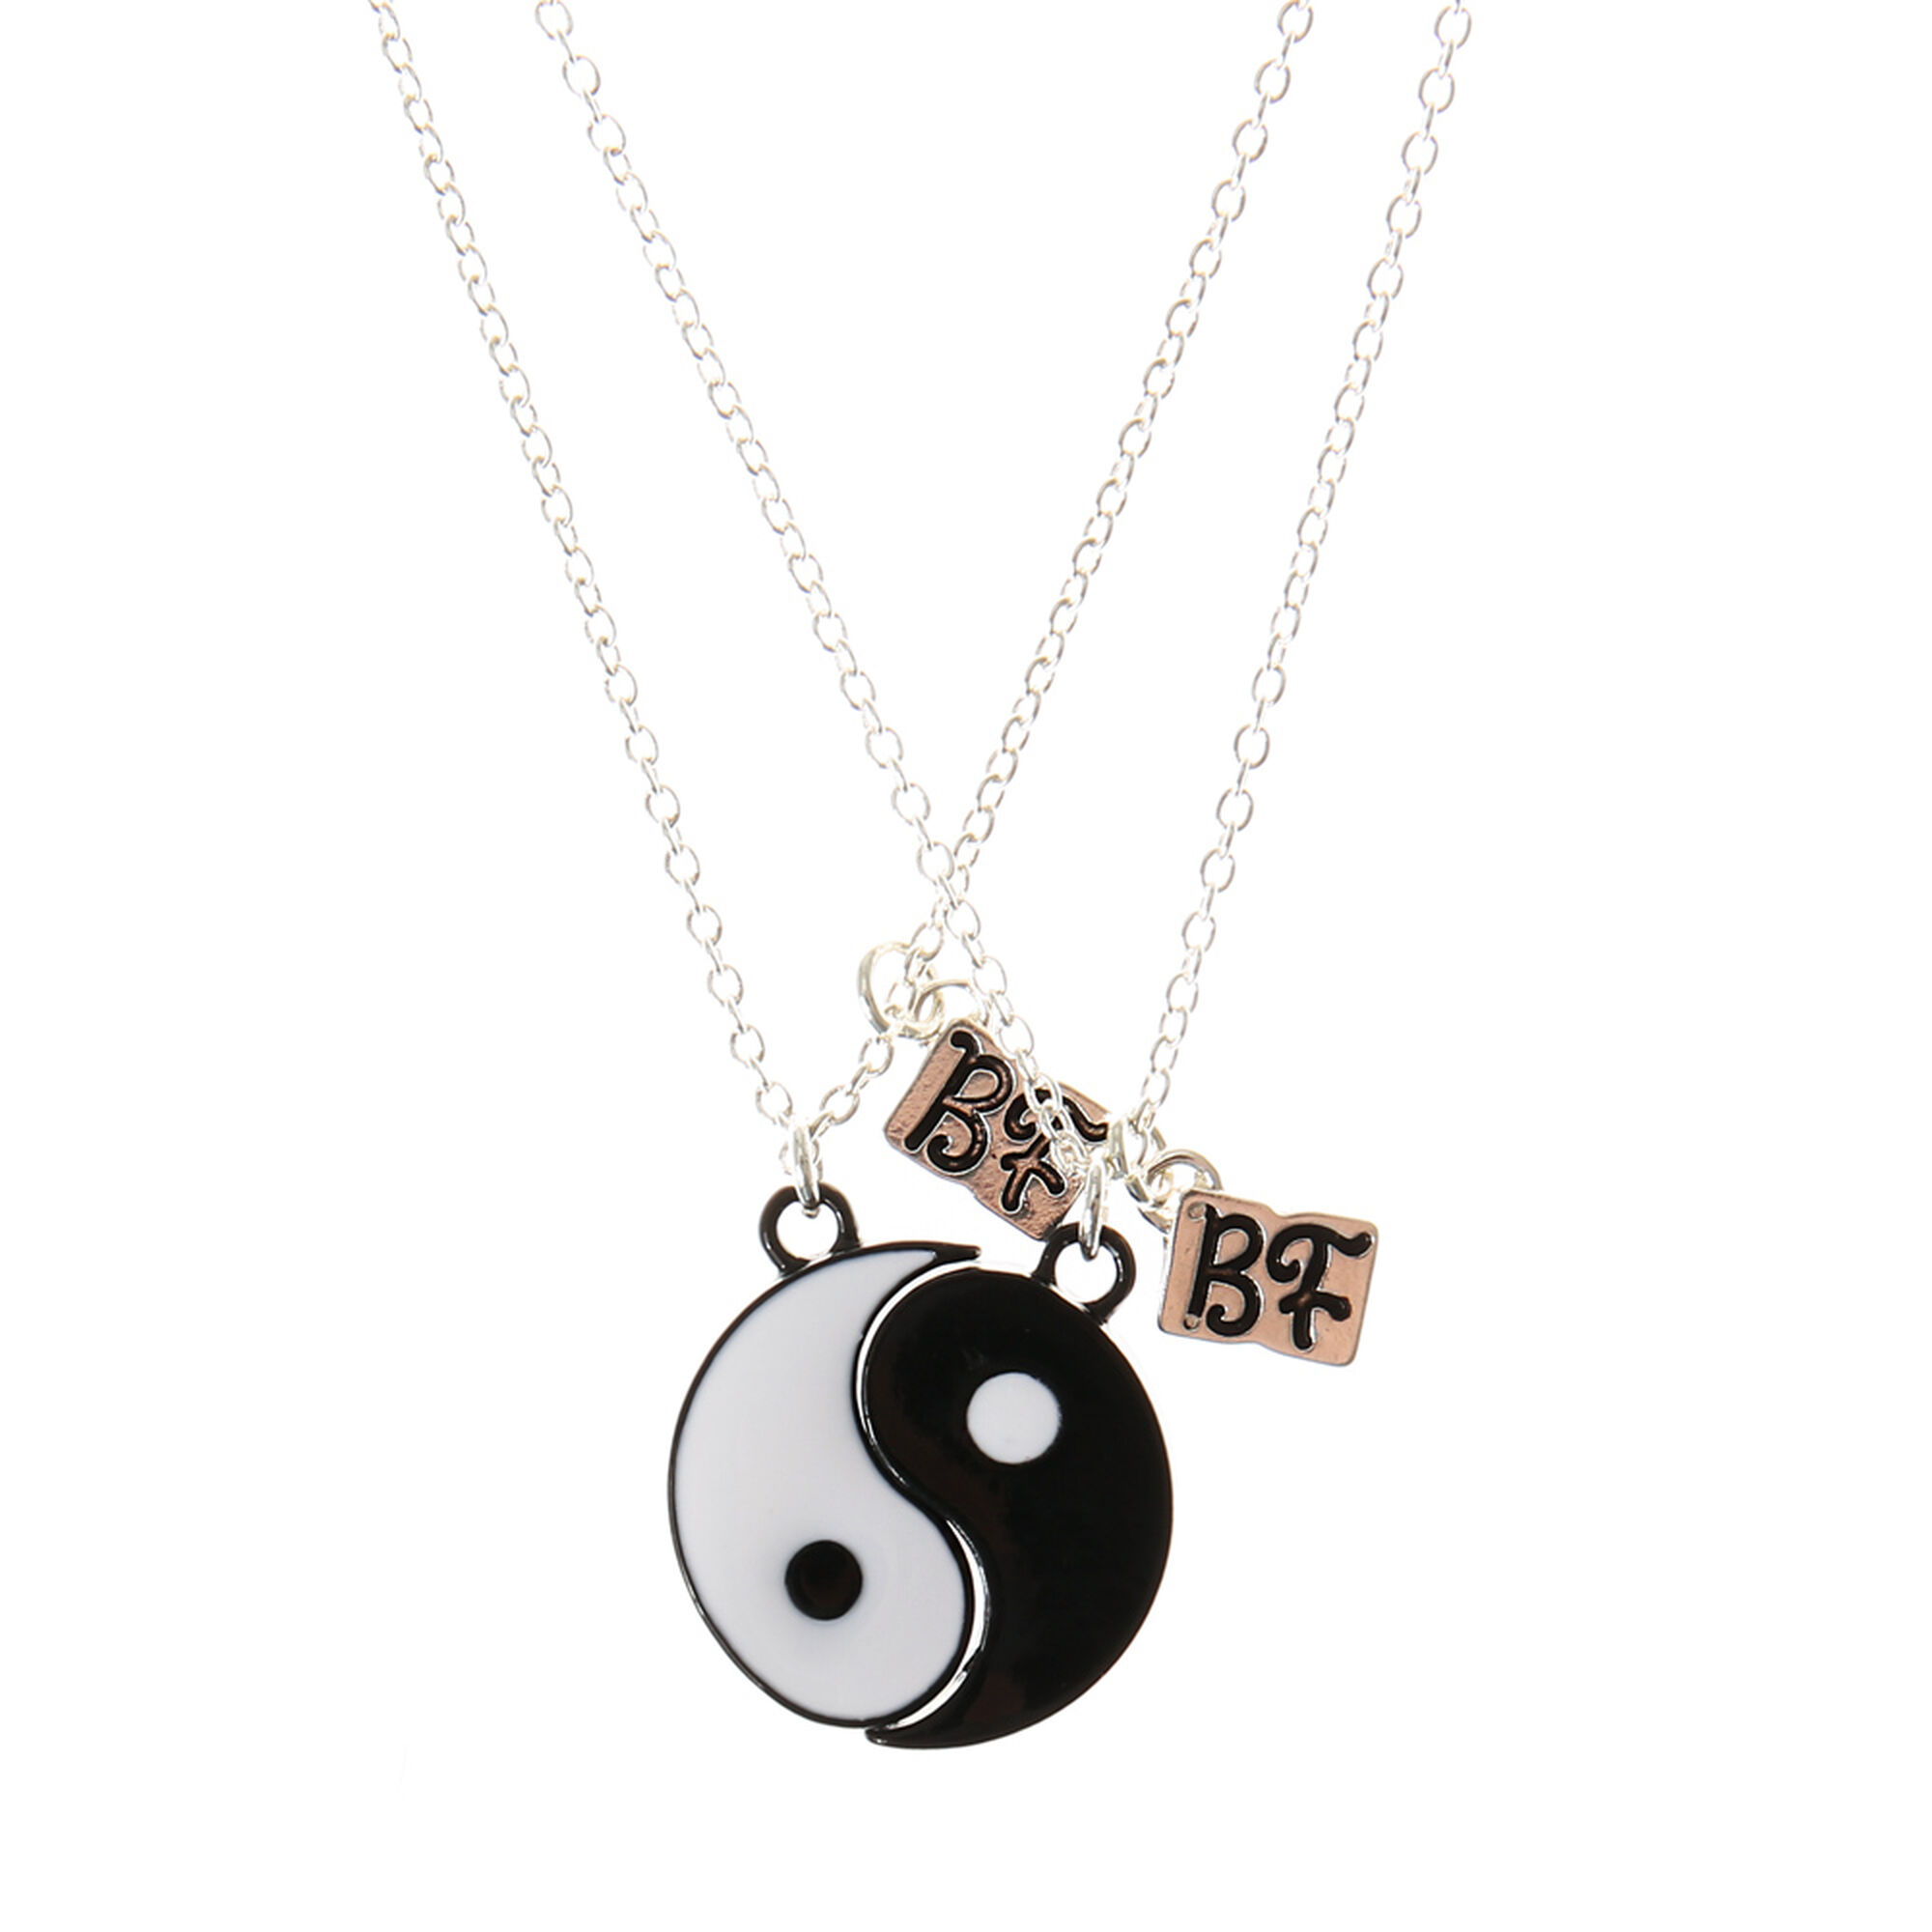 View Claires Best Friends Yin Yang Necklaces 2 Pack Silver information